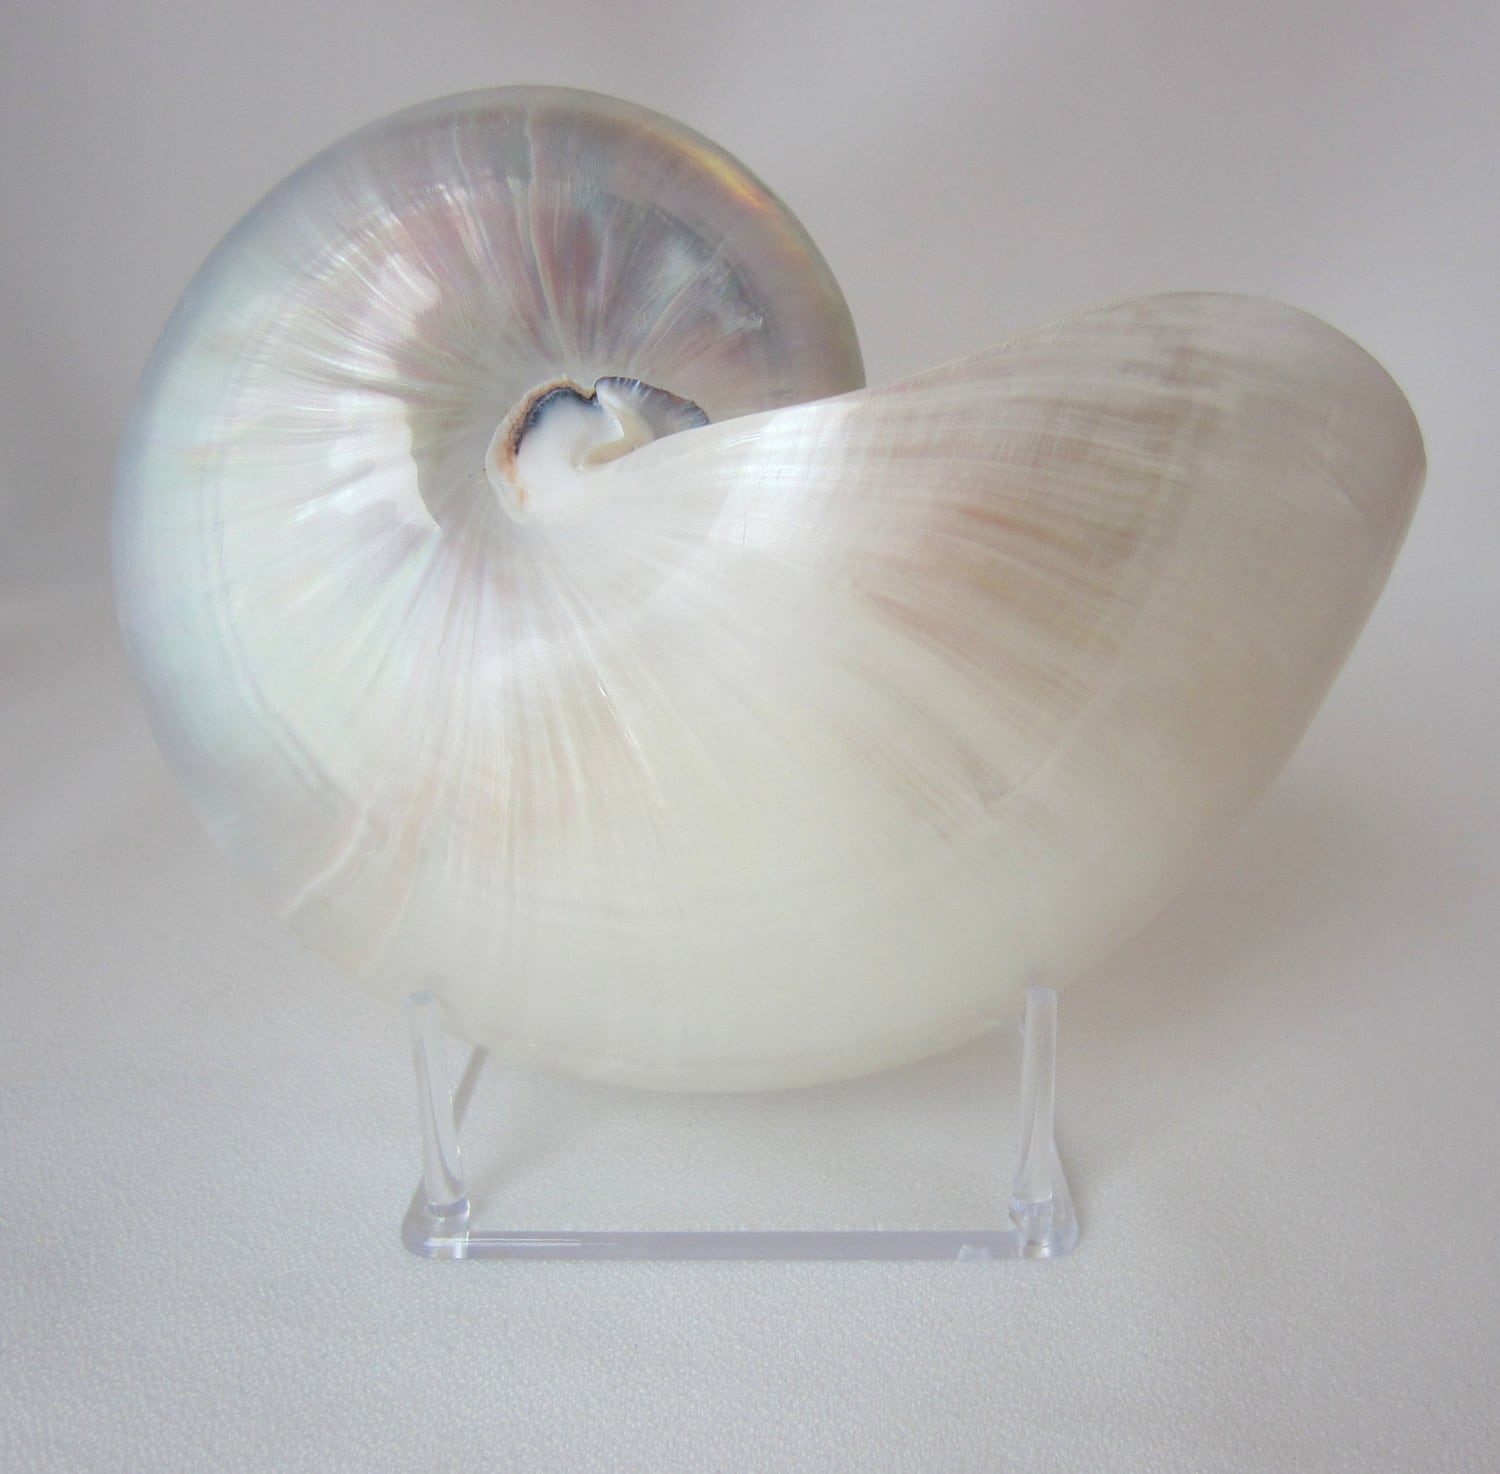 FOUR PRONGED ACRYLIC DISPLAY STAND 4-1/2" X 3-1/2" SEA SHELL DECOR REEF CORAL 